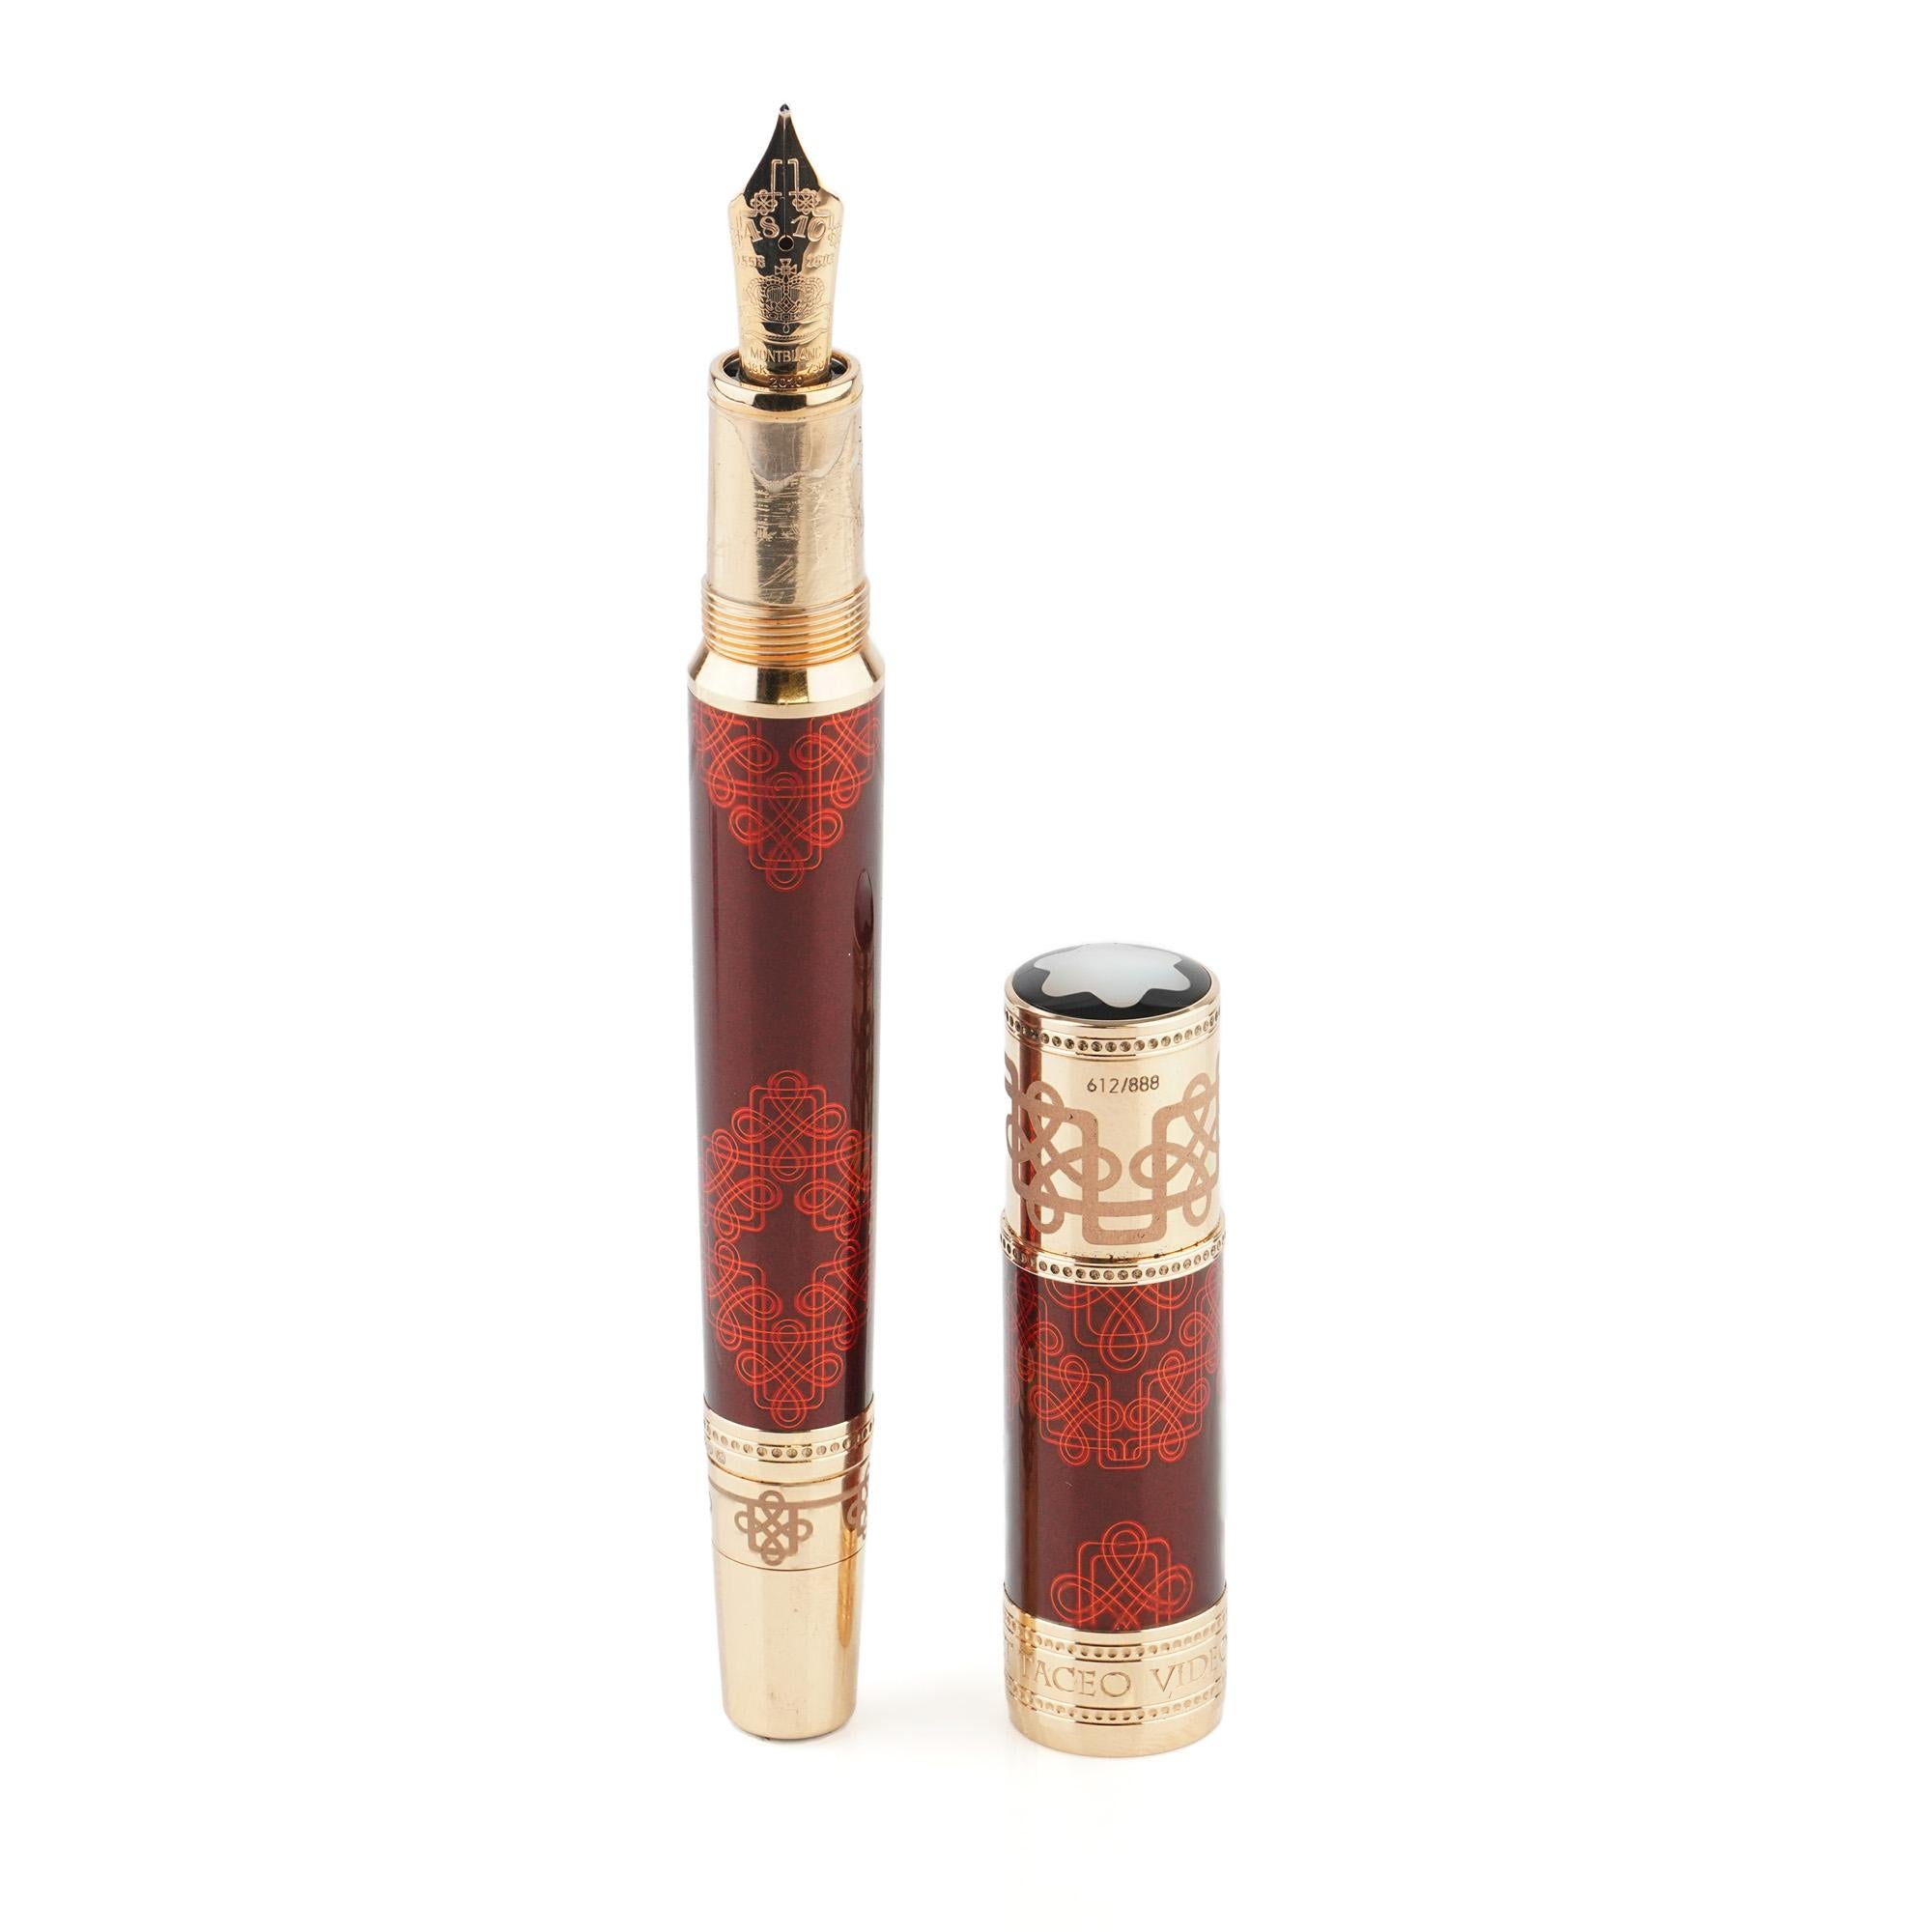 German Montblanc Elizabeth I Patron of Art Series Limited Edition 612/888 Fountain Pen For Sale